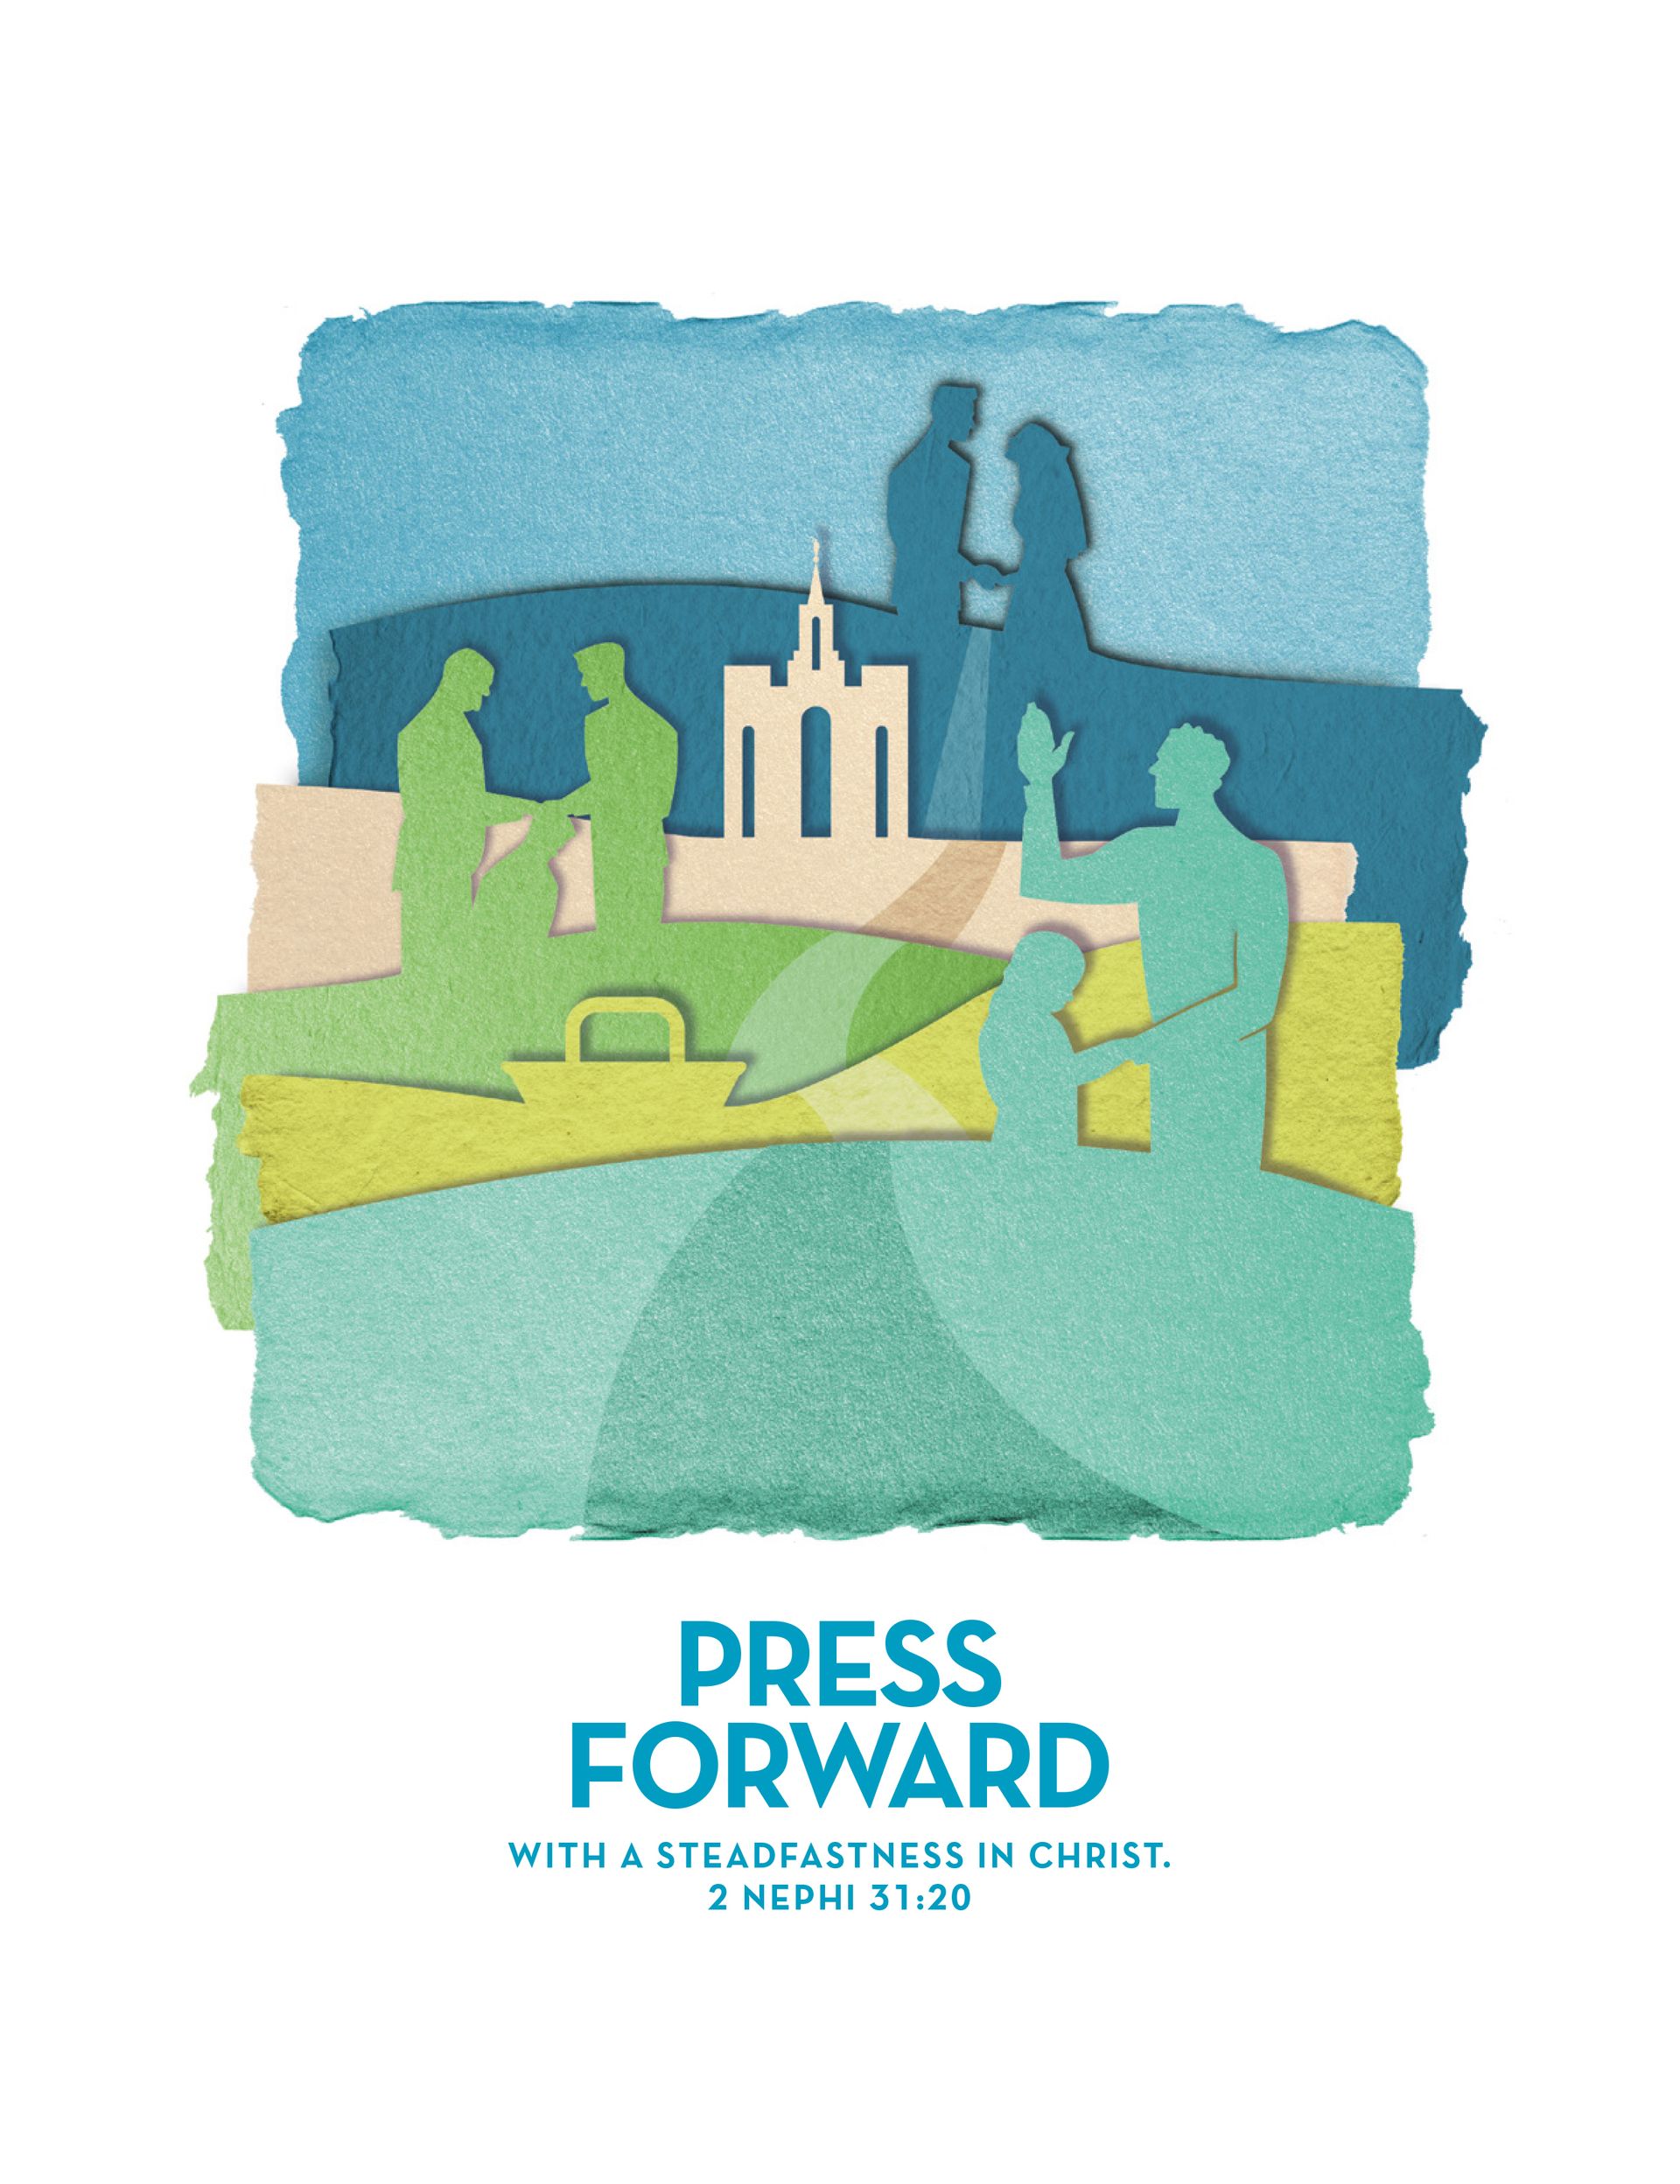 “Press forward with a steadfastness in Christ.” 2 Nephi 31:20. Jan. 2016